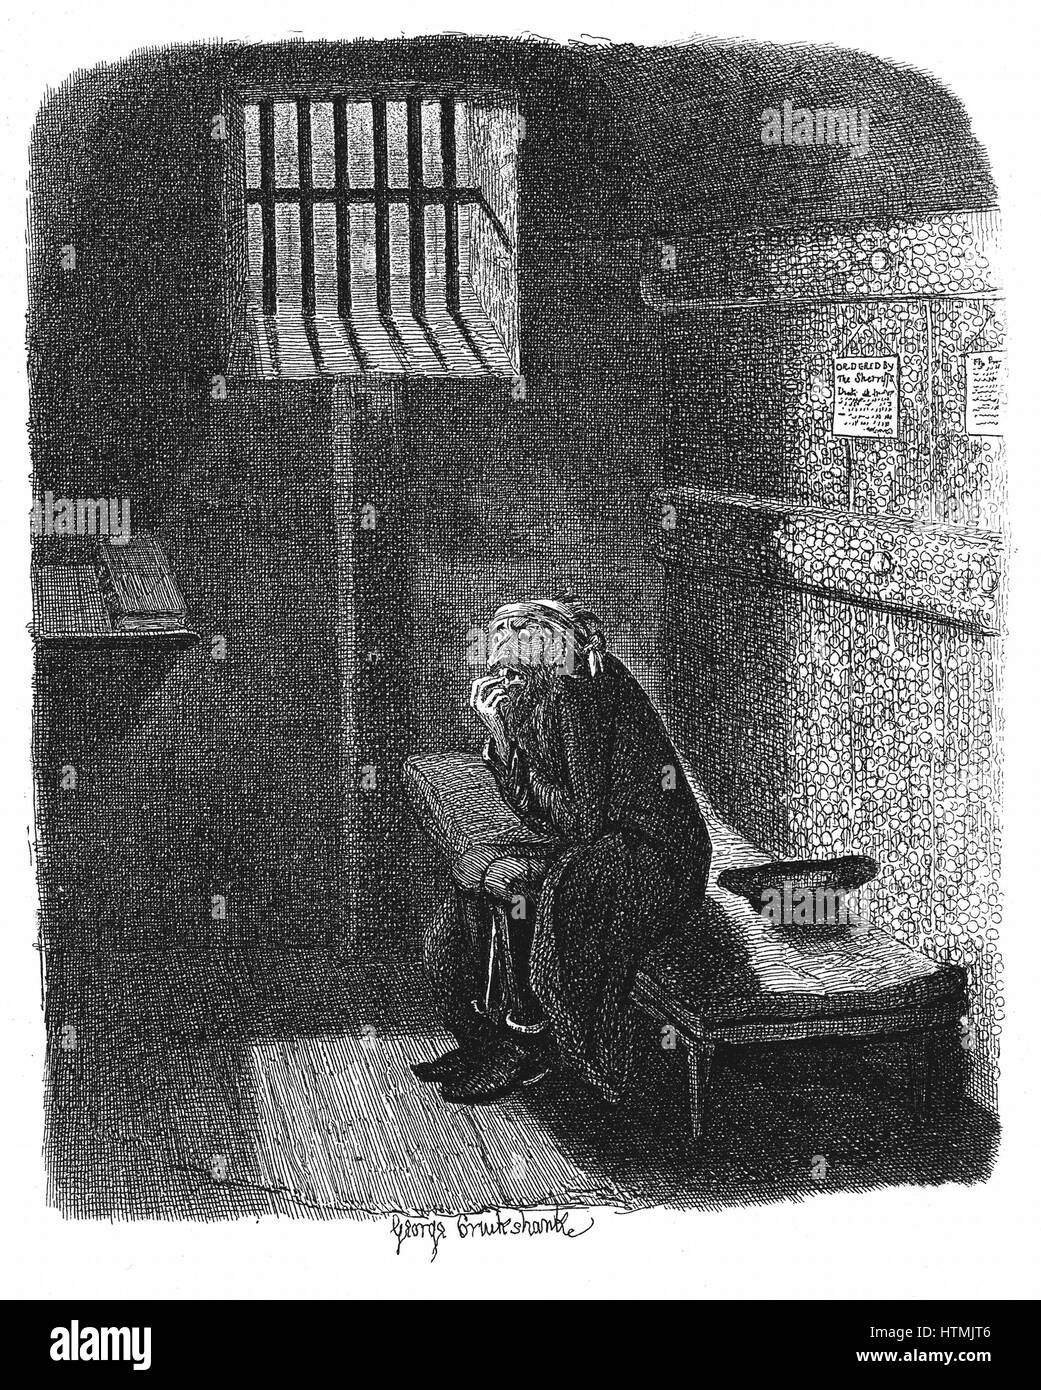 Fagin in the condemned cell in Newgate prison awaiting his execution. George Cruikshank illustration for Charles Dickens 'Oiliver Twist', London, 1837-38. Engraving Stock Photo